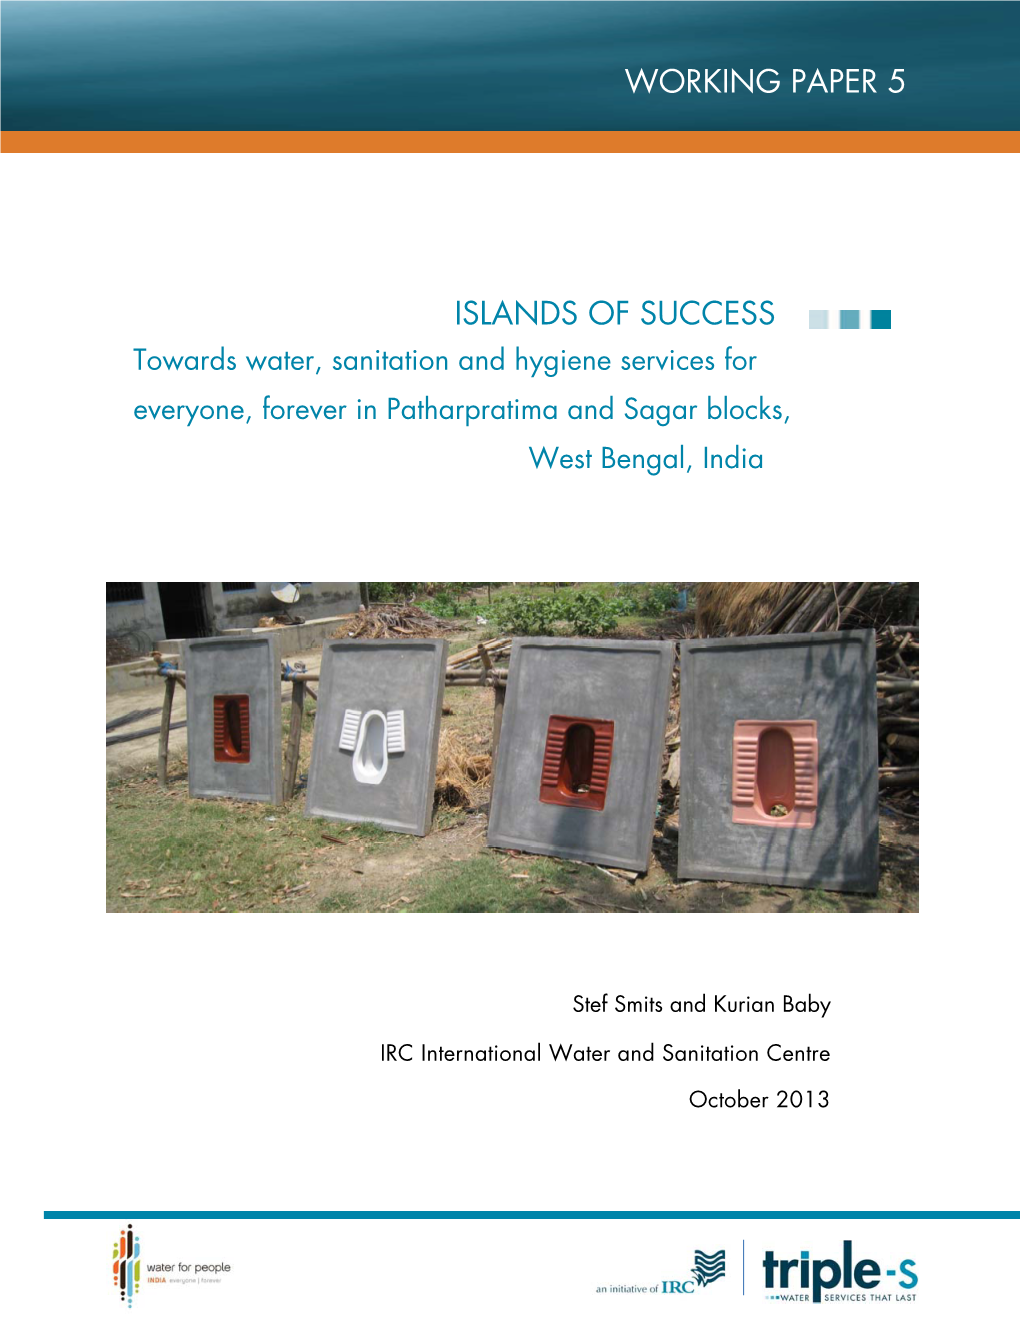 Islands of Success: Towards Water Sanitation and Hygiene Services for Everyone Forever Patharpratima and Sagar Blocks